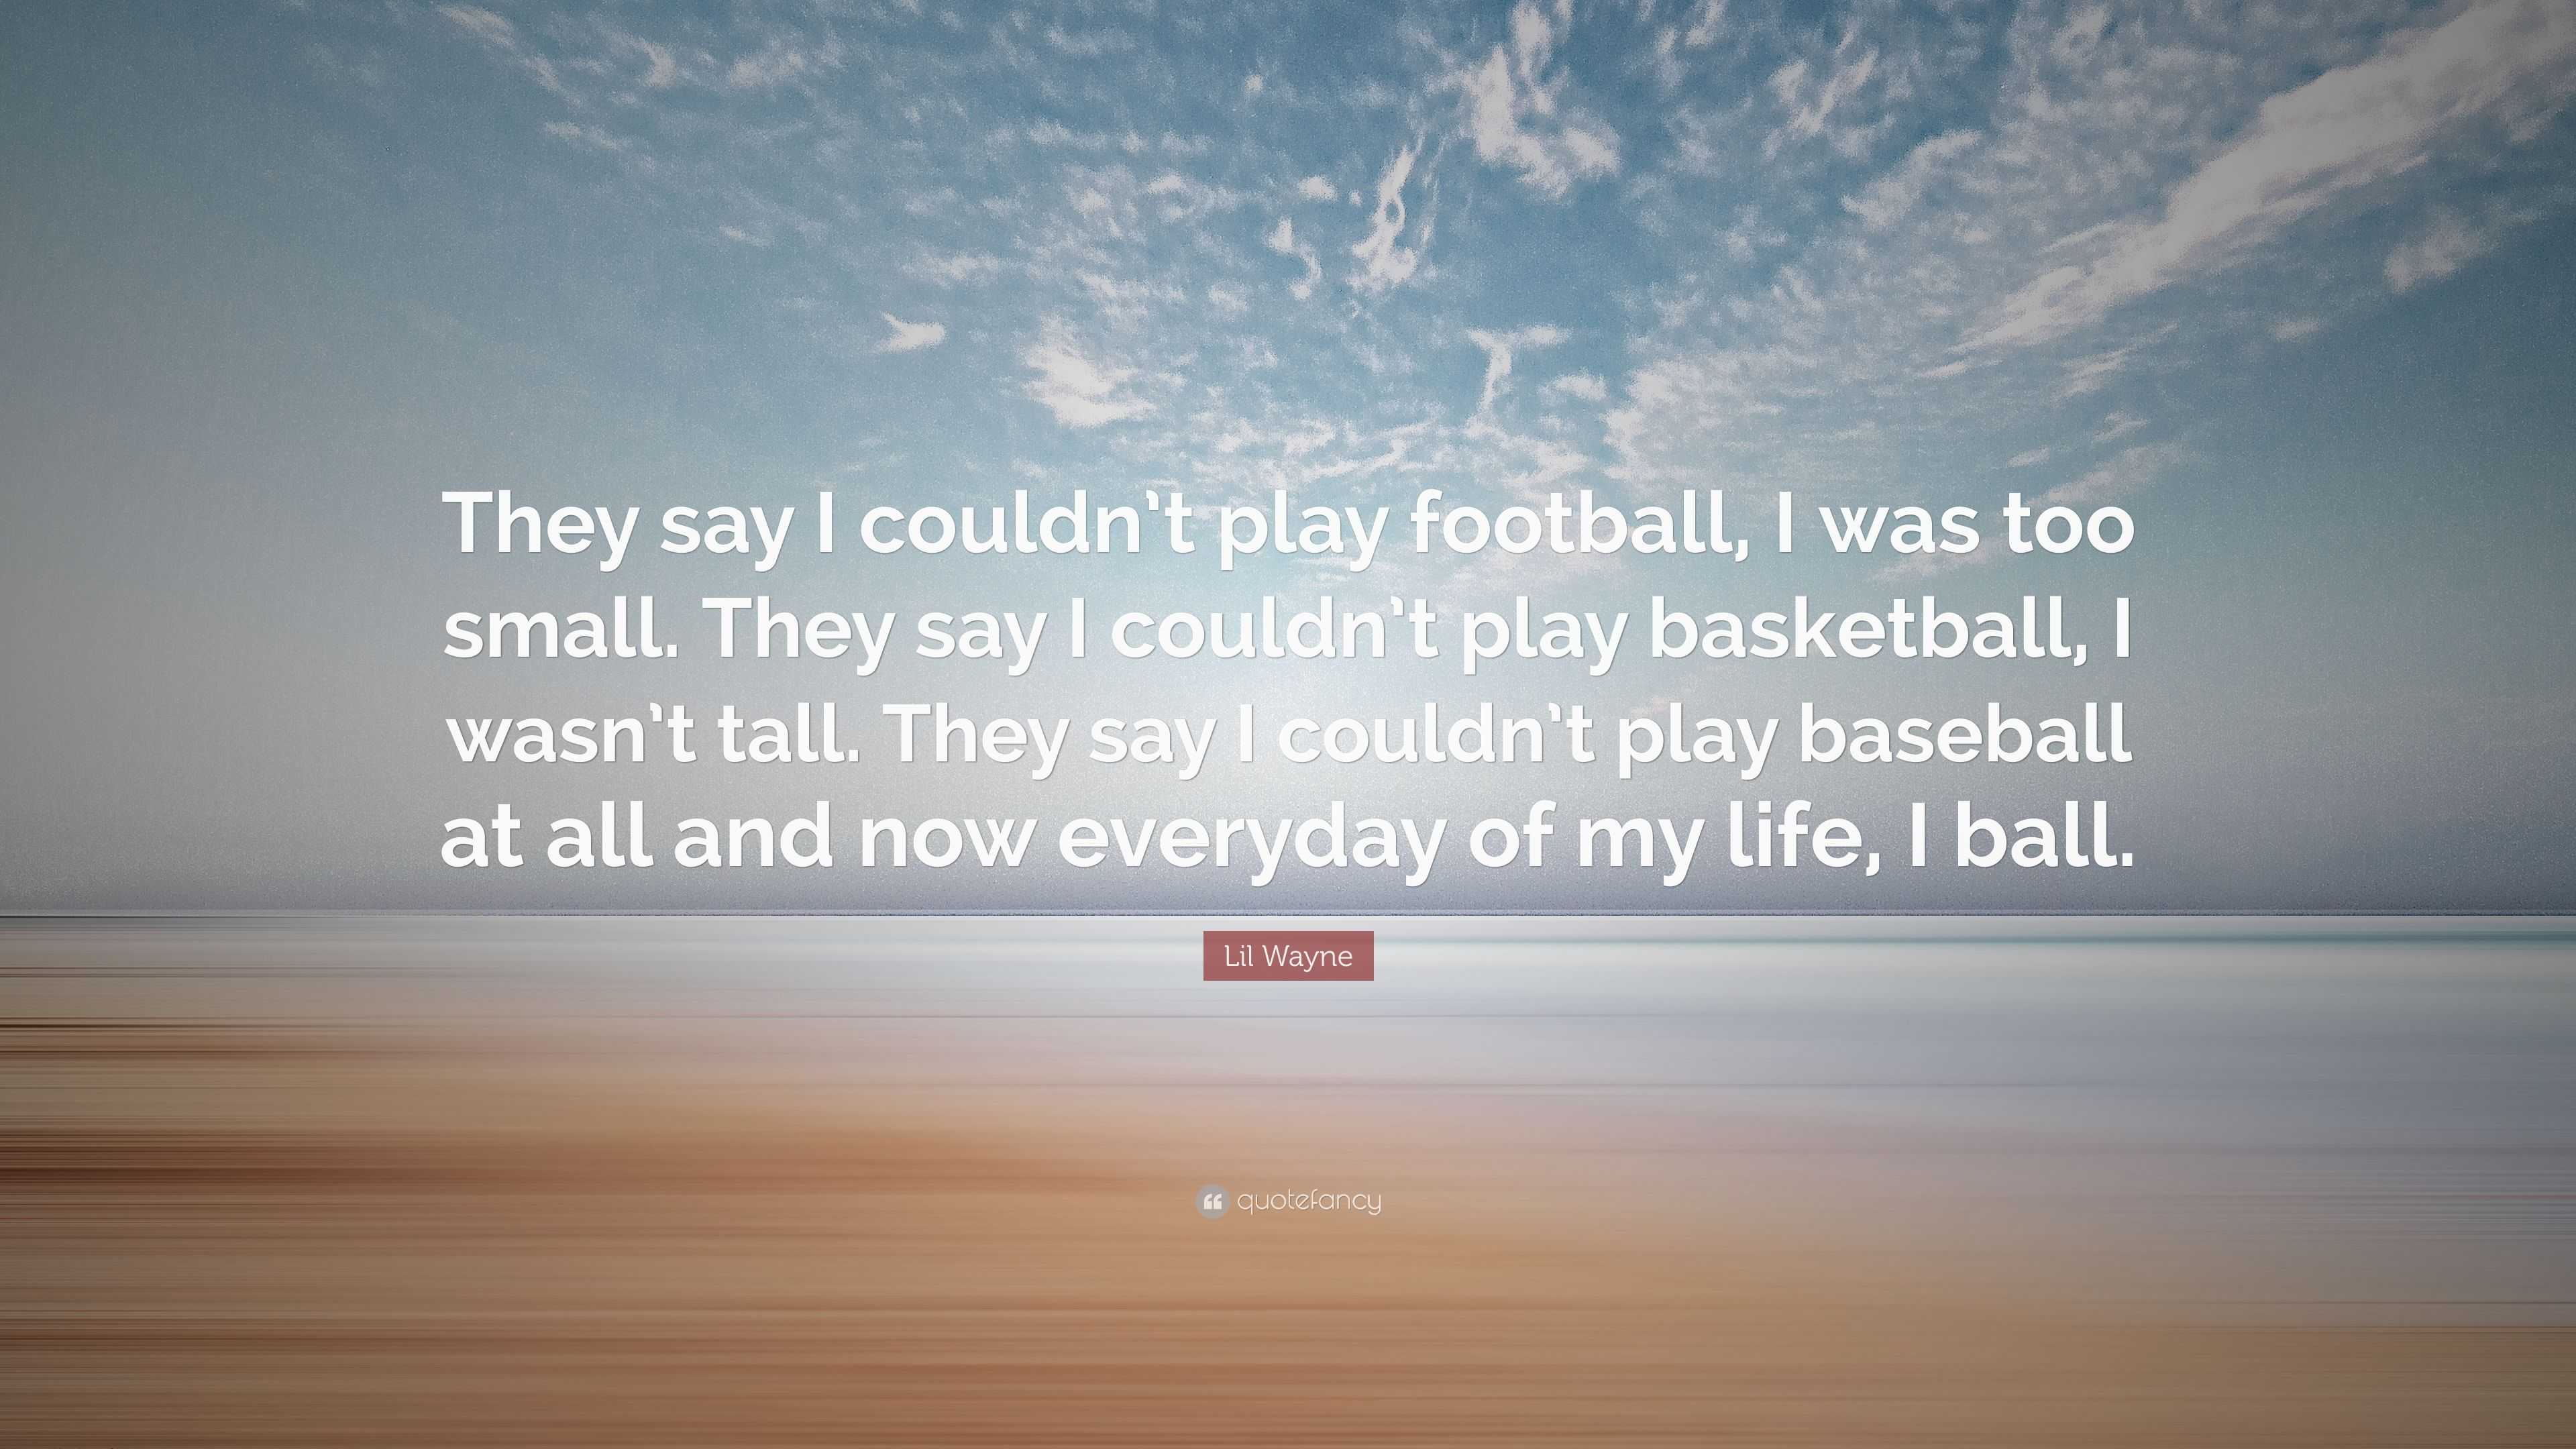 Lil Wayne Quote: “They say I couldn’t play football, I was too small ...